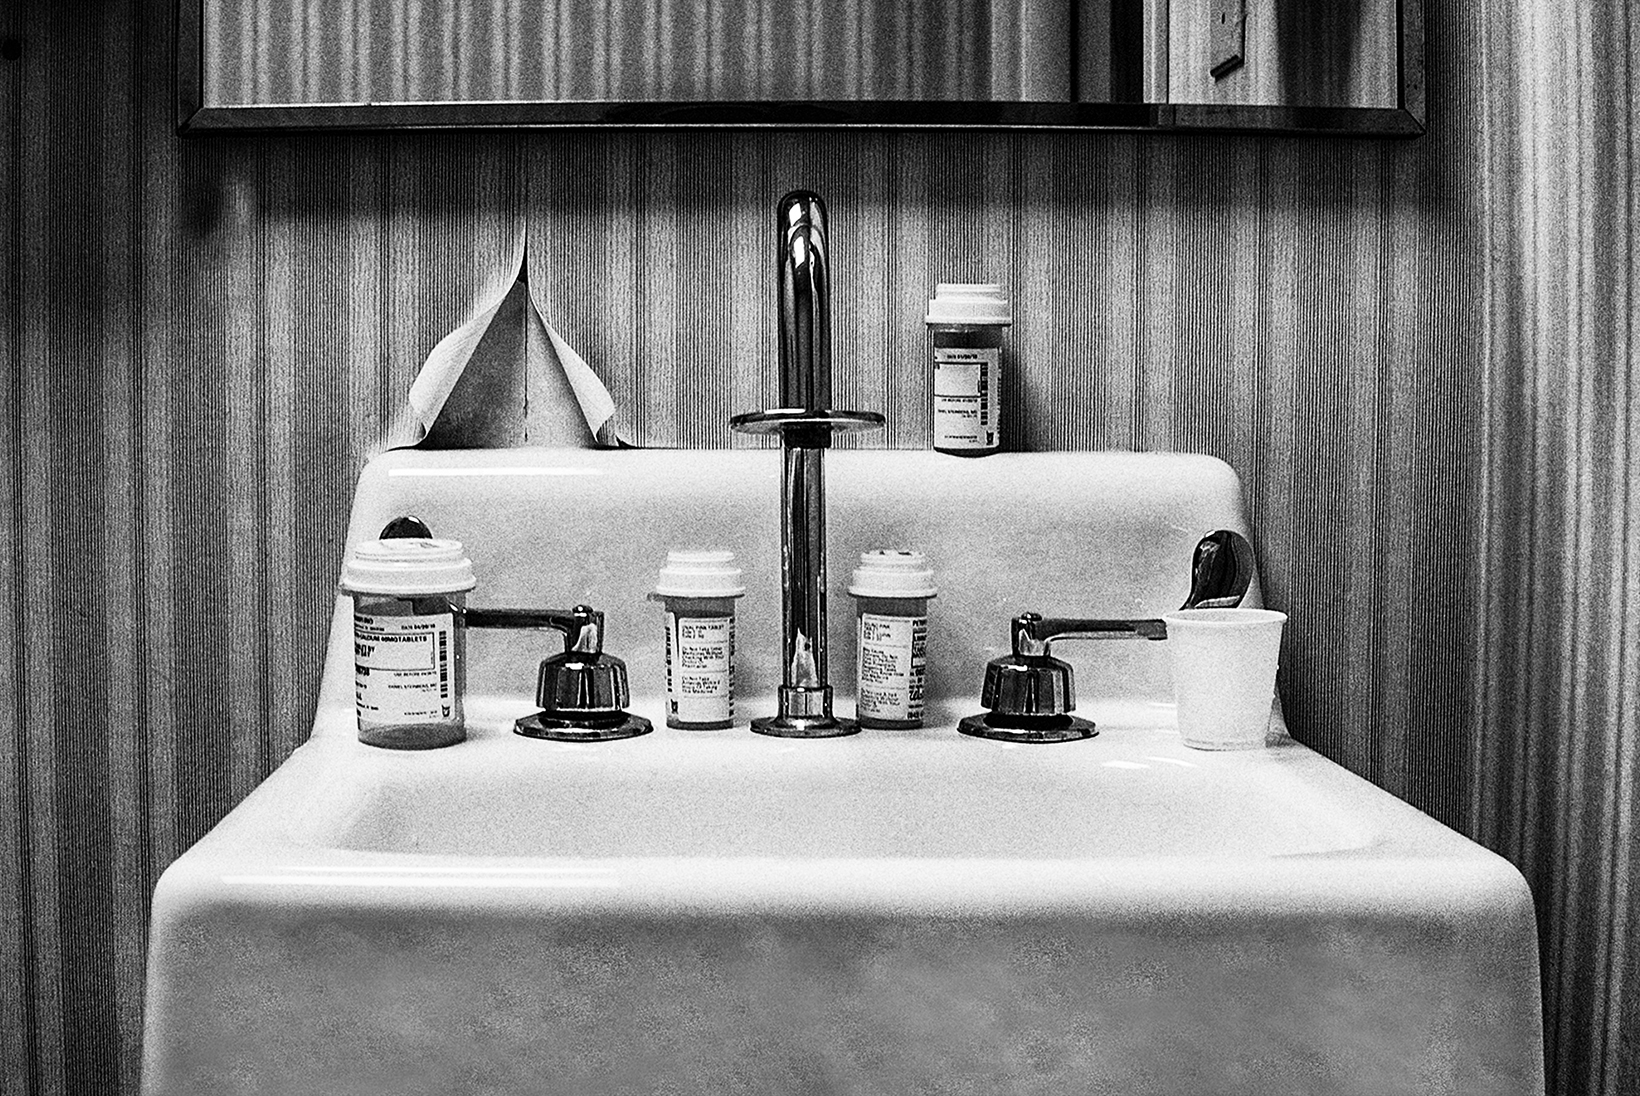 Close-up of the top of a small, white, pedestal bathroom sink with silver fixtures and the bottom part of a rectangular mirror against peeling, striped wallpaper. On the sink are pill bottles and a small plastic cup.